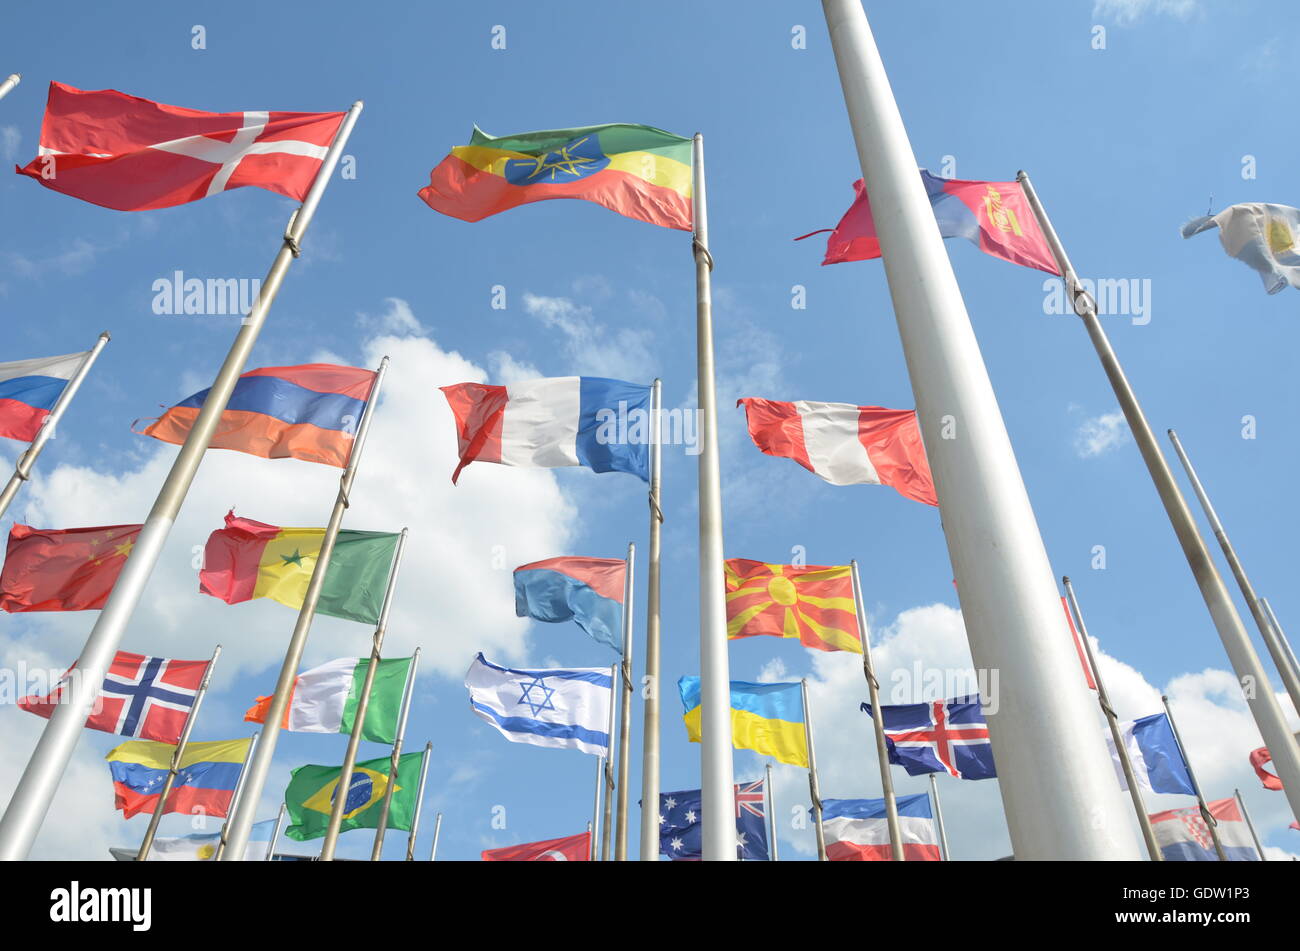 collection, flags, many, different nations, flag poles, clouds, blue sky, windy Stock Photo